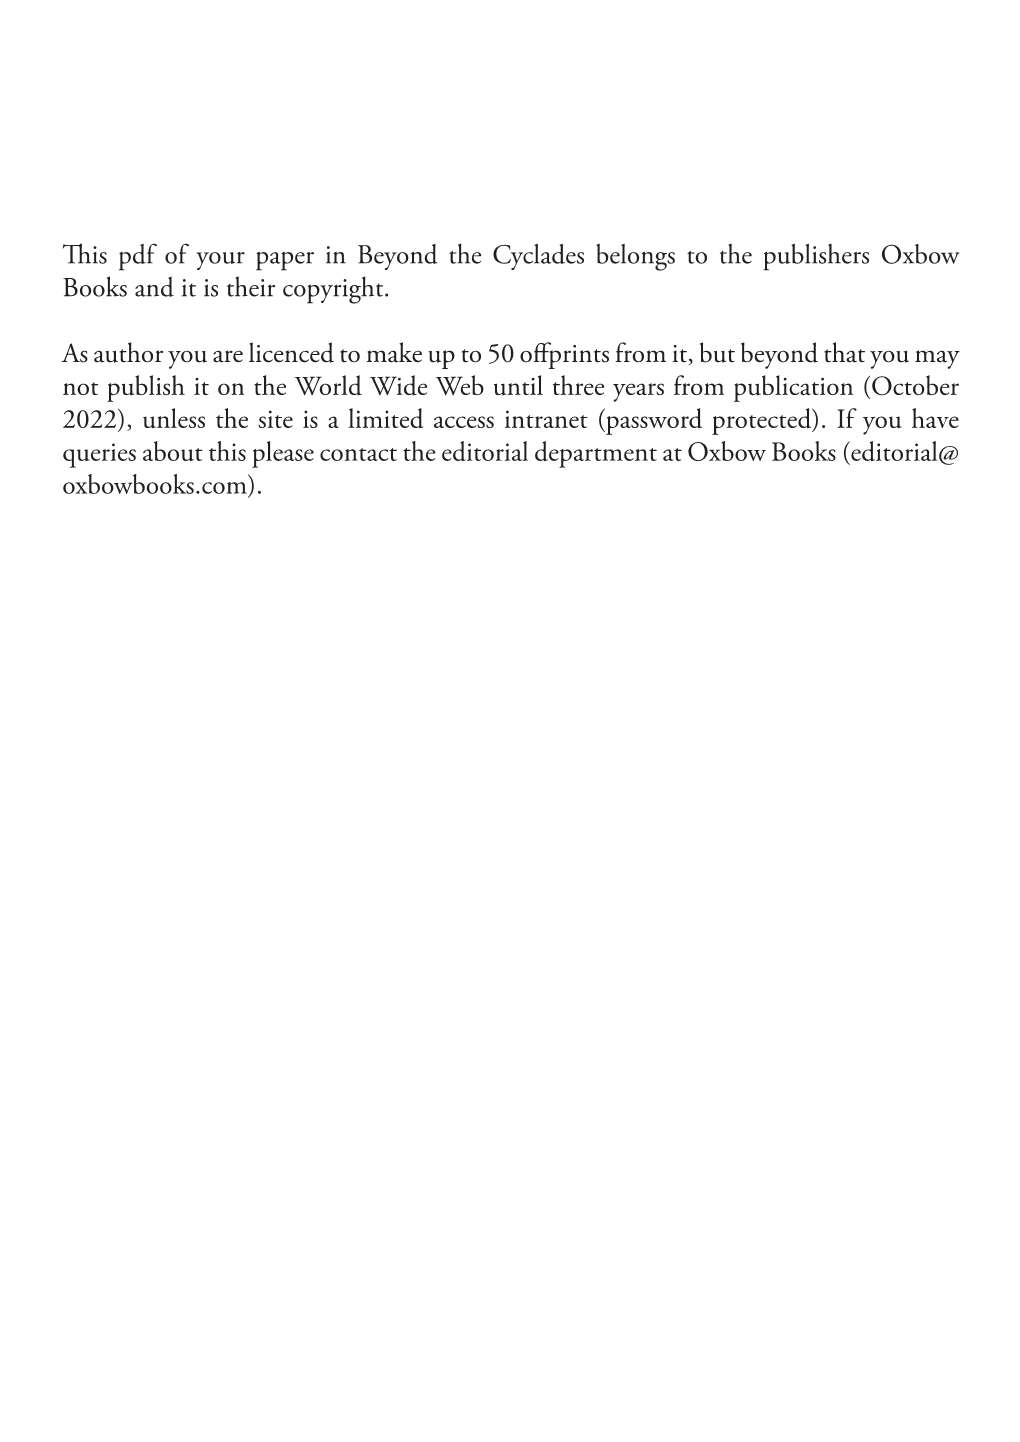 This Pdf of Your Paper in Beyond the Cyclades Belongs to the Publishers Oxbow Books and It Is Their Copyright